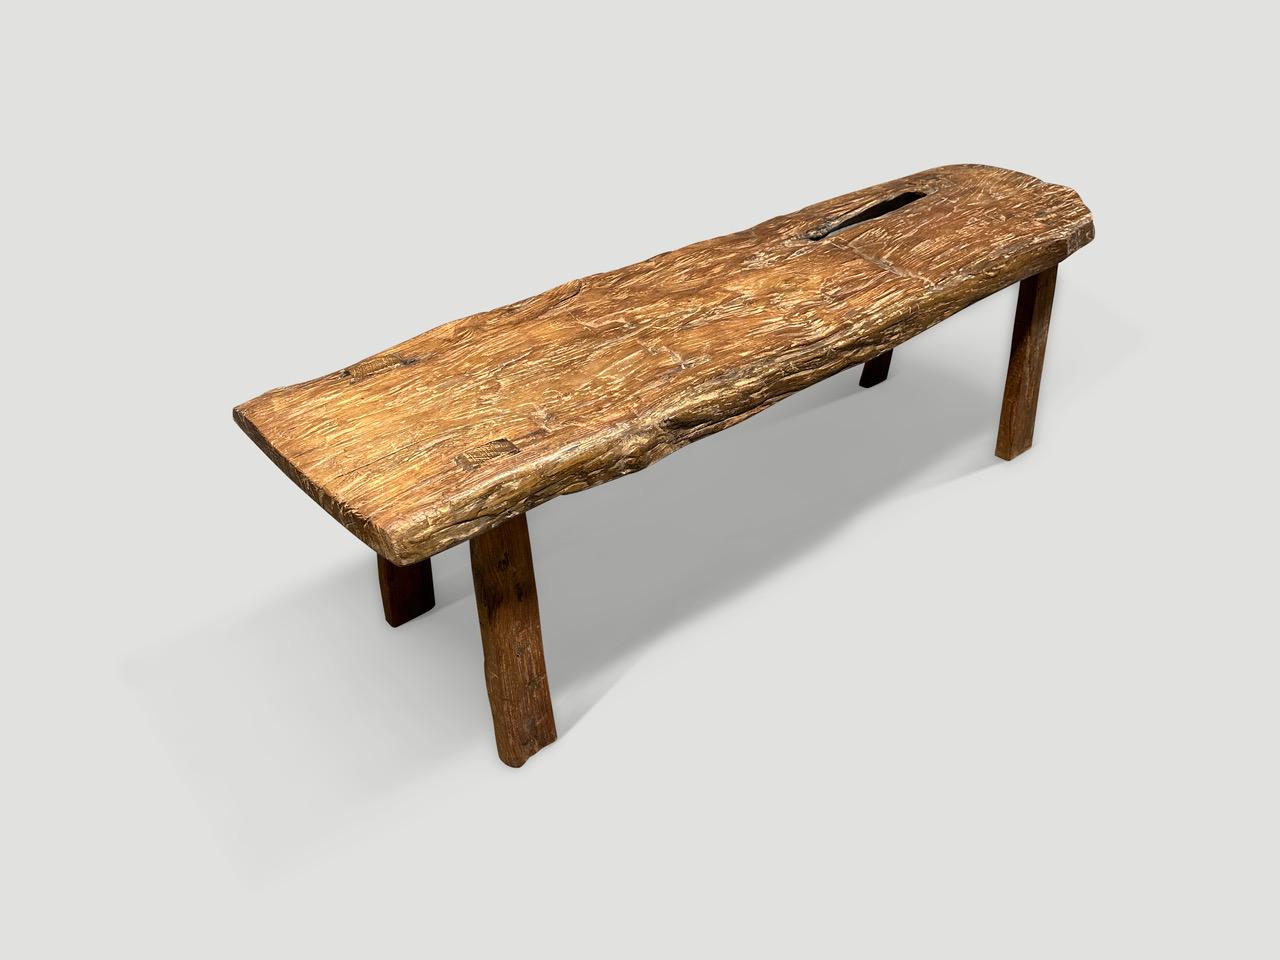 Beautiful antique bench hand made from a single thick slab of teak wood with lovely patina. Circa 1950.

This bench was hand made in the spirit of Wabi-Sabi, a Japanese philosophy that beauty can be found in imperfection and impermanence. It is a